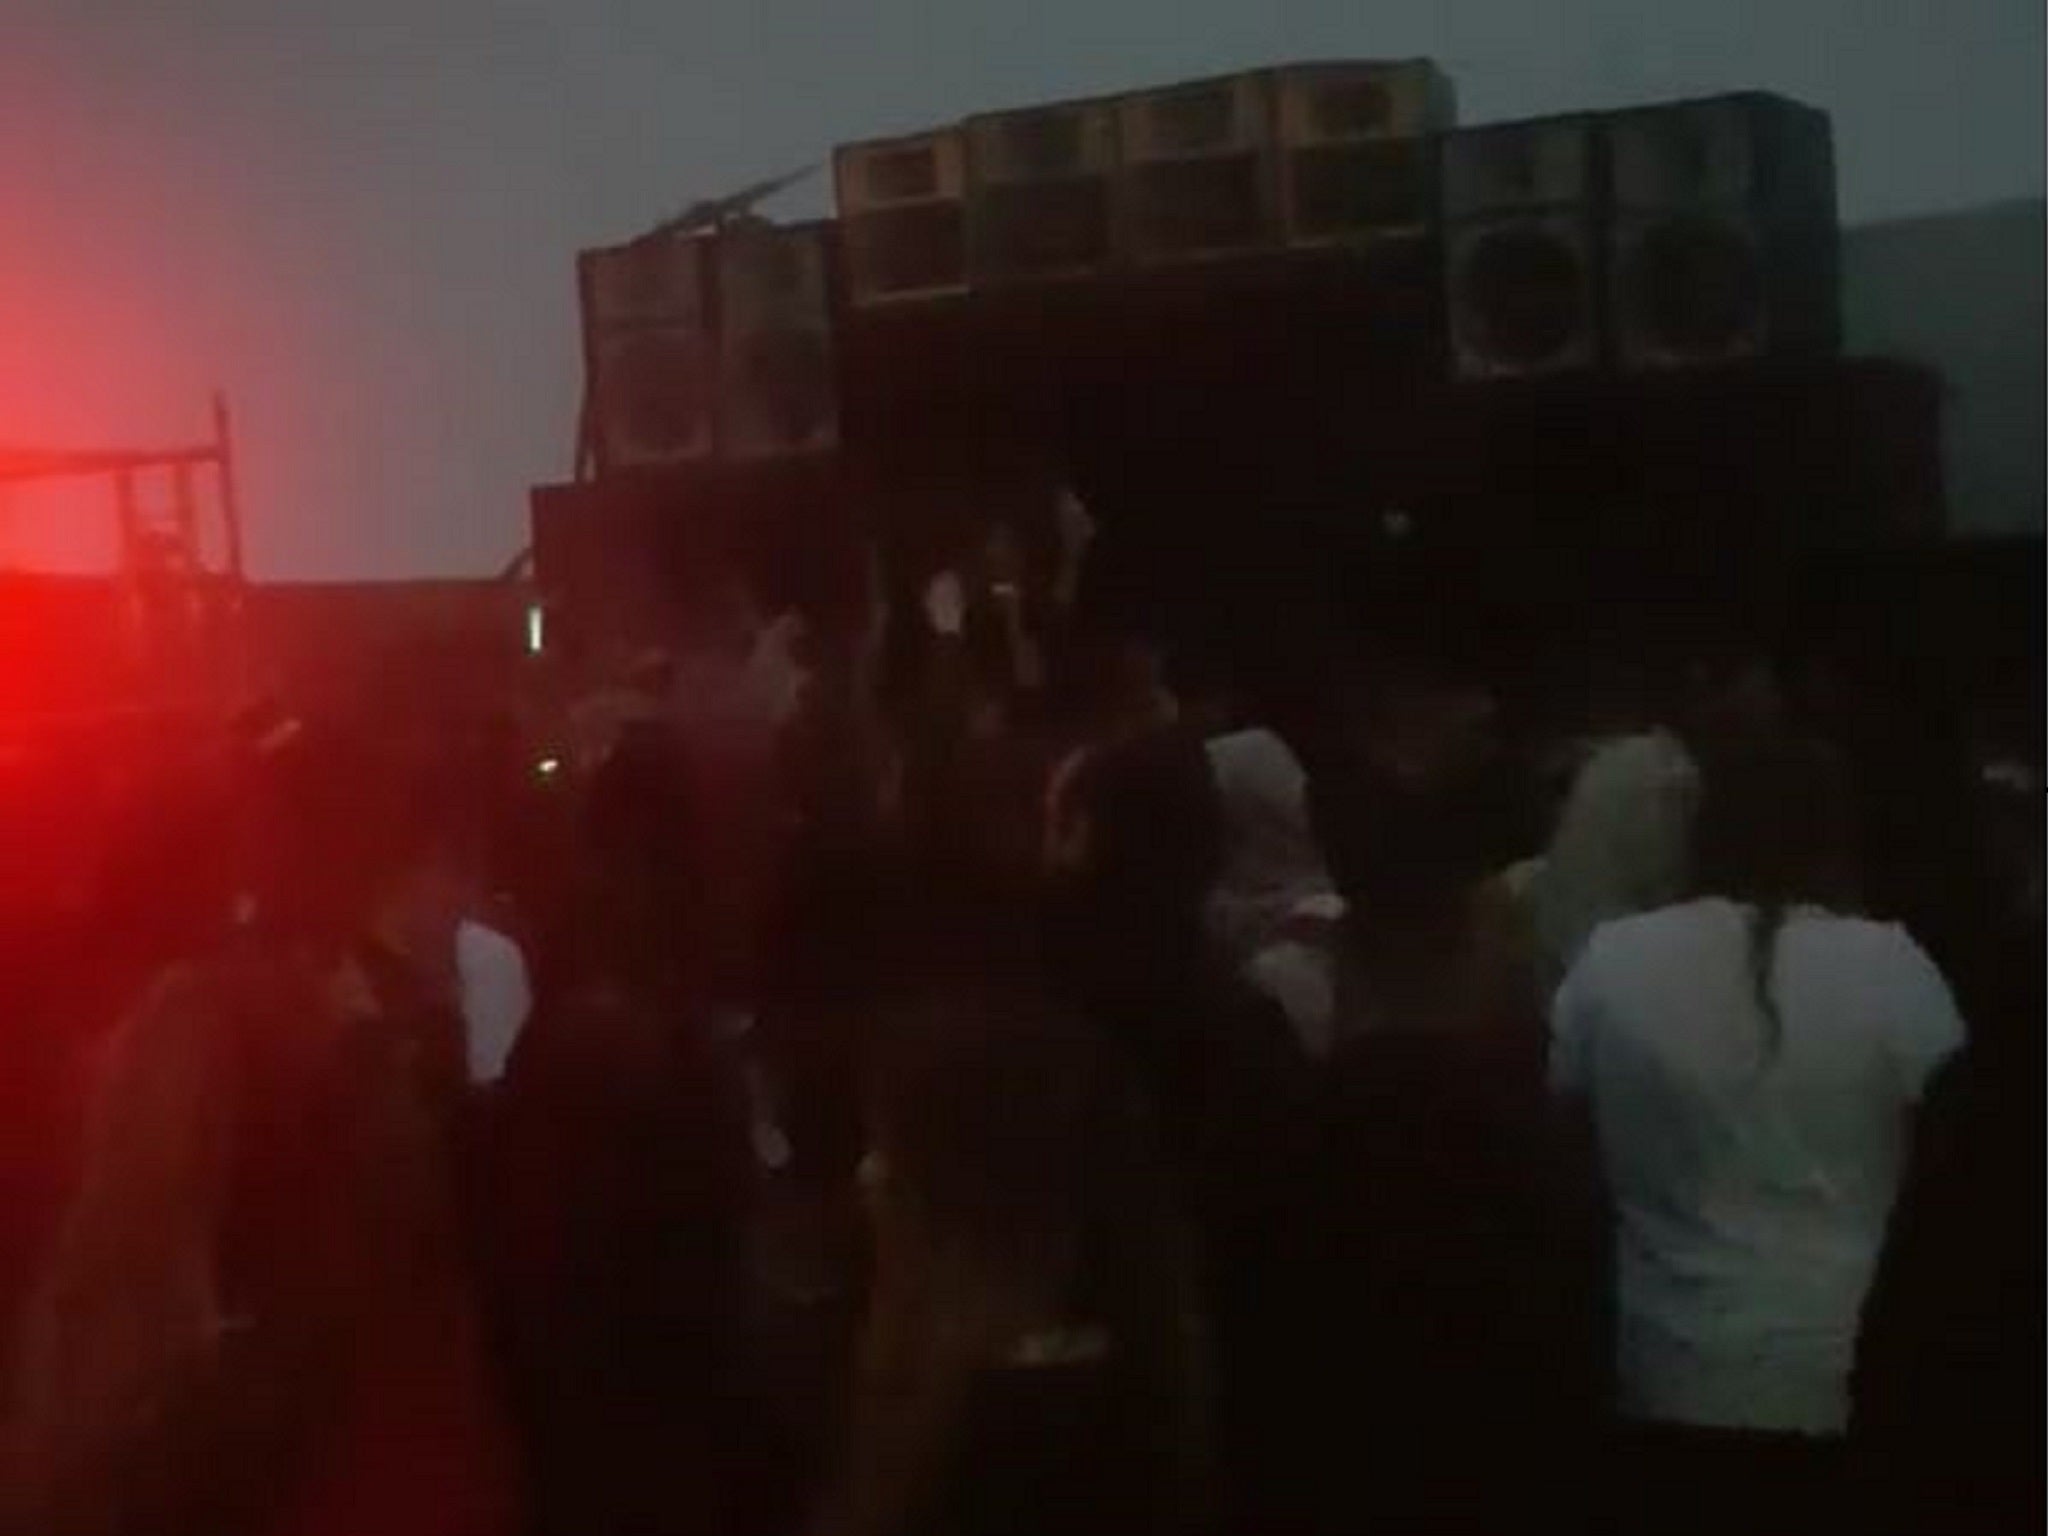 Video footage appeared to show crowds attending the illegal rave in Steyning, West Sussex